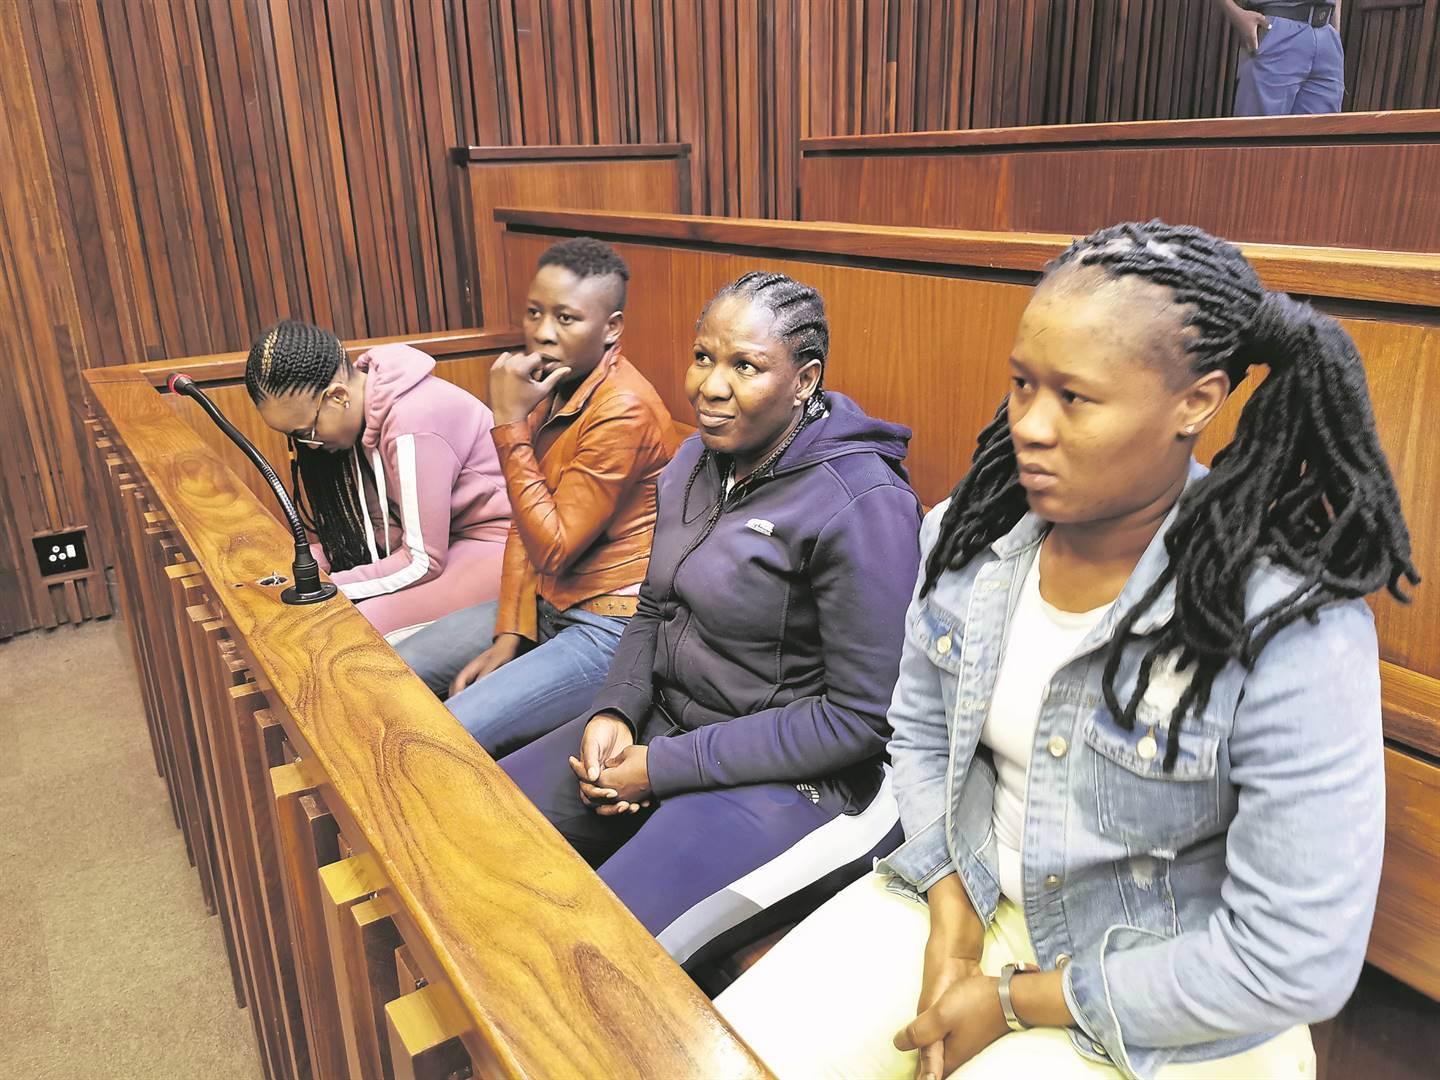 The accused Tshegofatso Moremane, Gontse Thloele, Margaret Koaile and Portia Mmola appeared again in the     high court in Joburg for their murder    and theft trial. Photo by Christopher Moagi